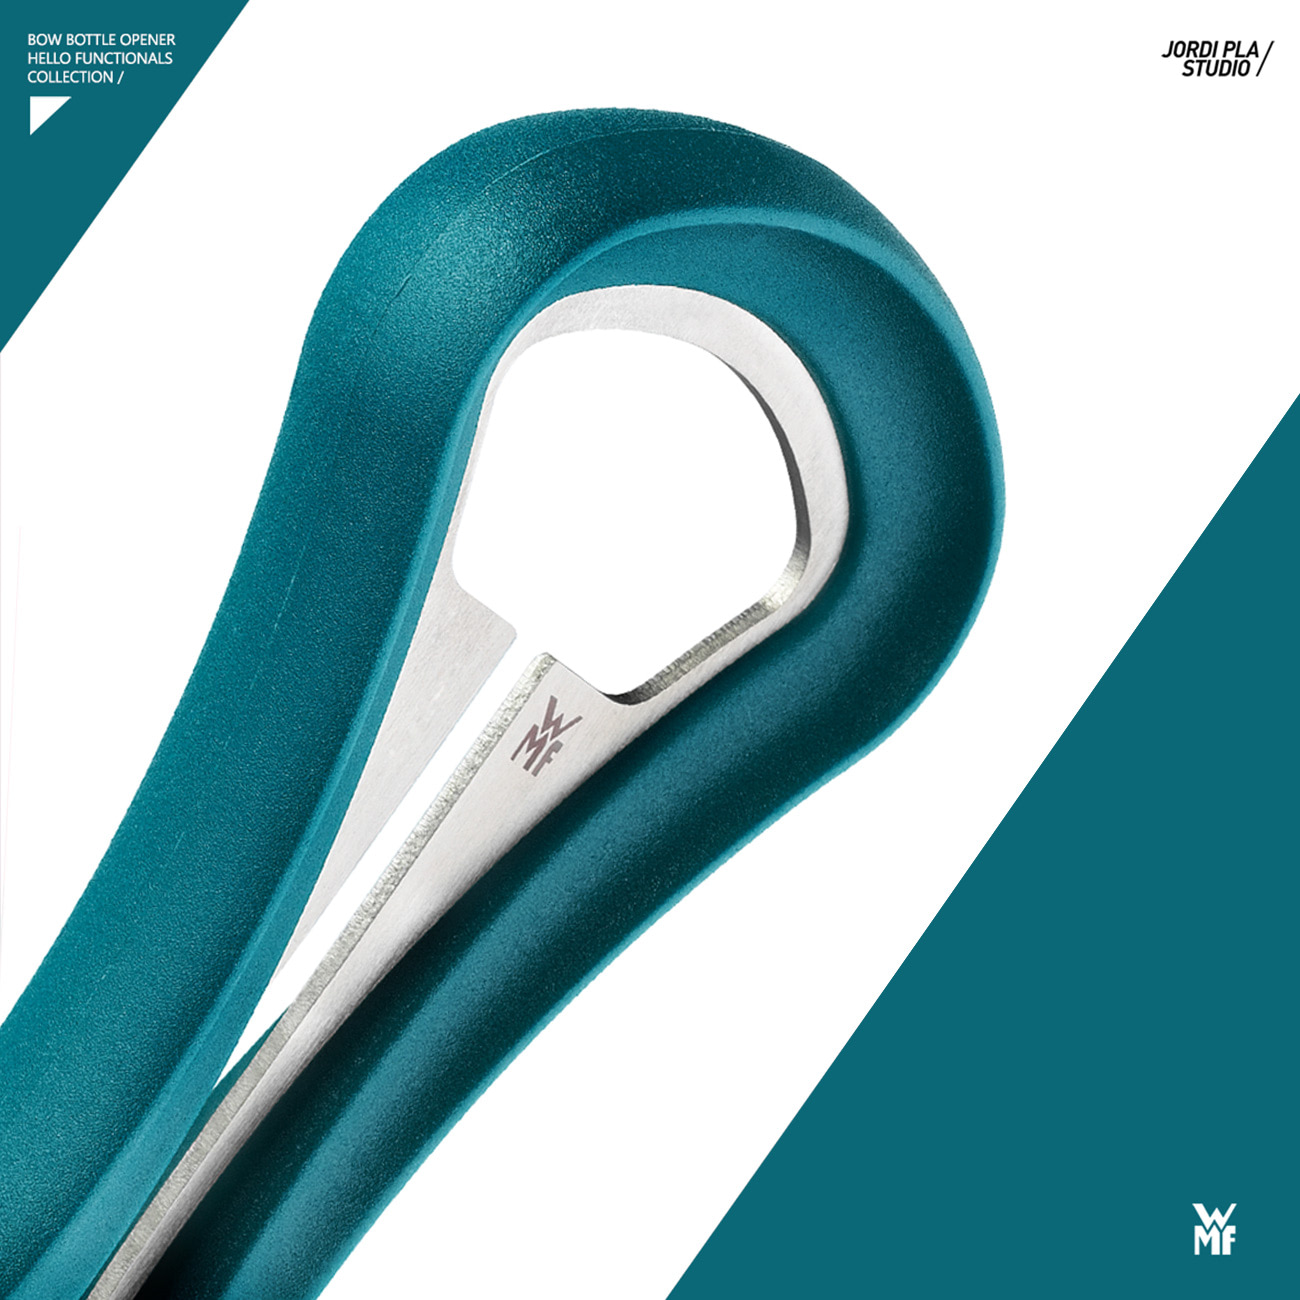 It’s a pleasure to present the first collaboration between our studio with the renamed Germany company WMF. Bow it’s a bottle opener it’s part from of the collection “Hello Functionals” offering smart and fresh solutions.